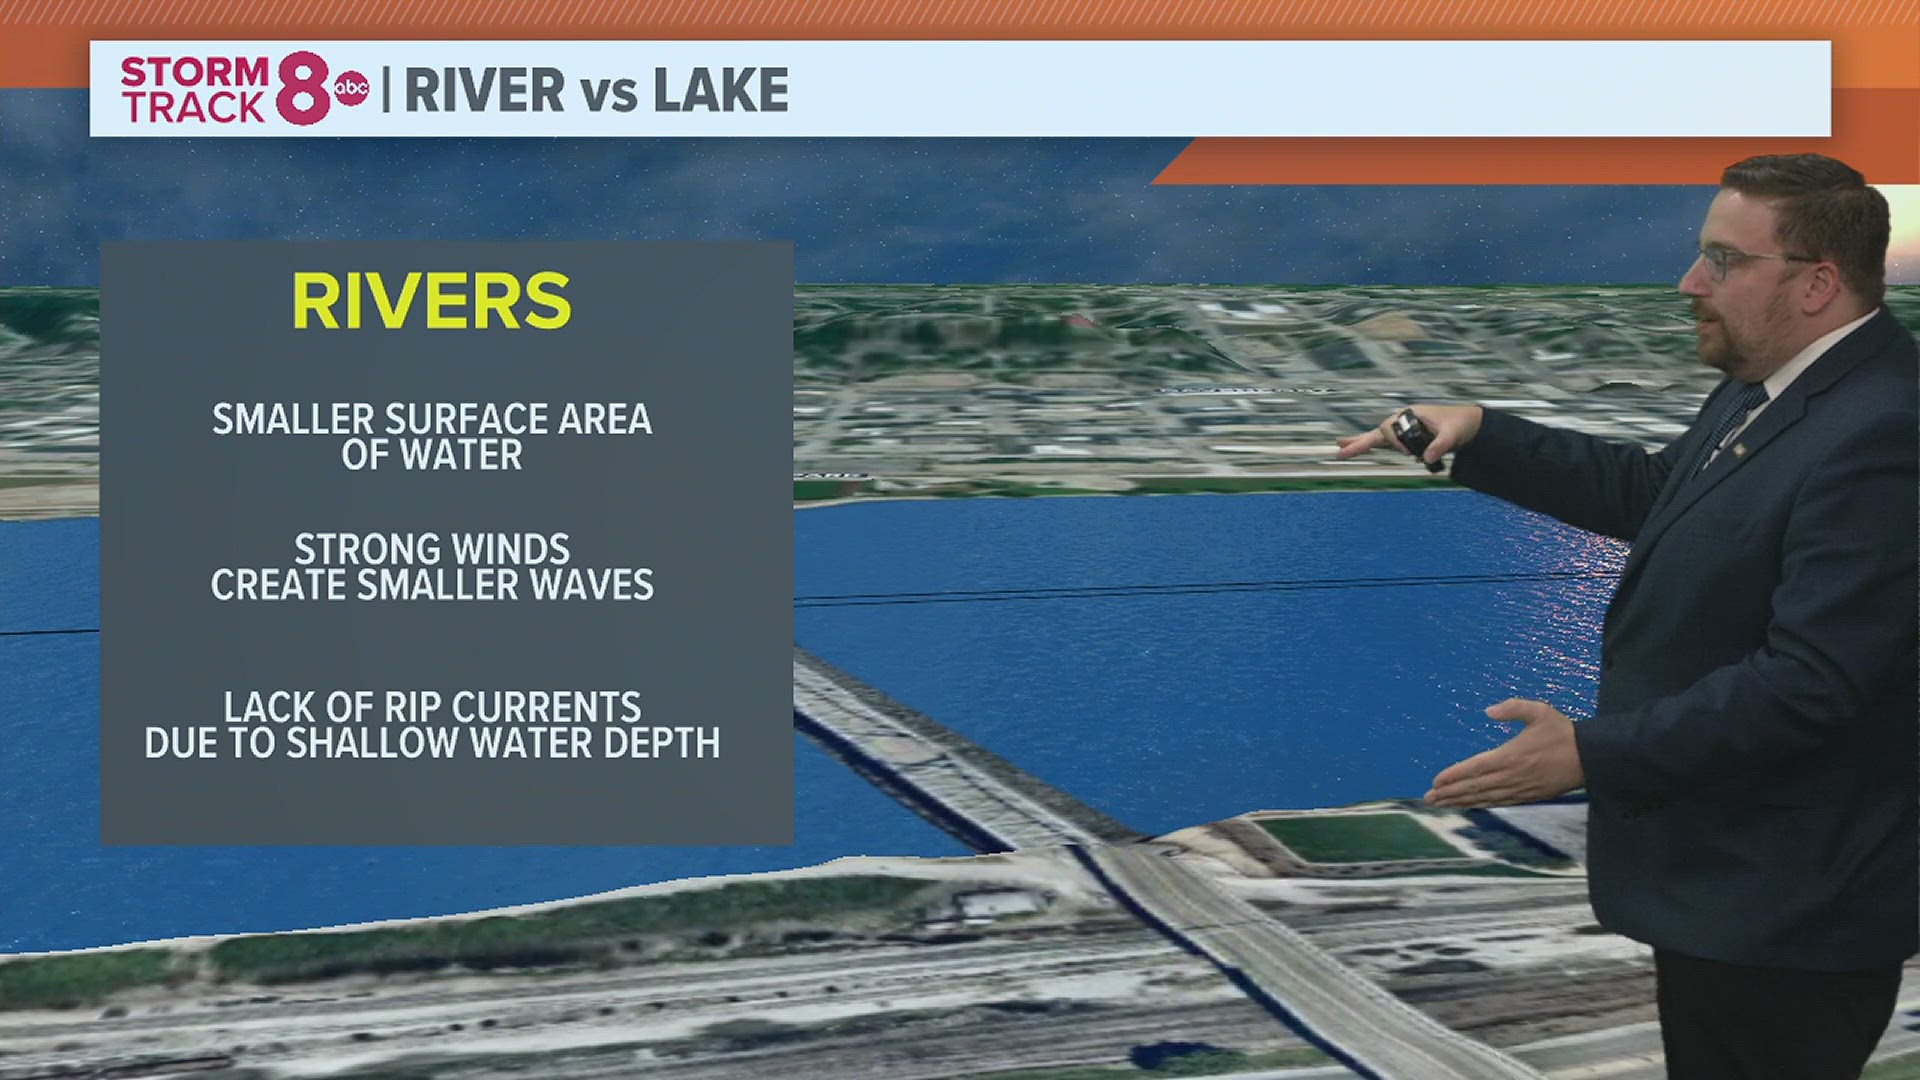 Weather impacts between the Mississippi River and large lakes, like Lake Michigan, are very different.